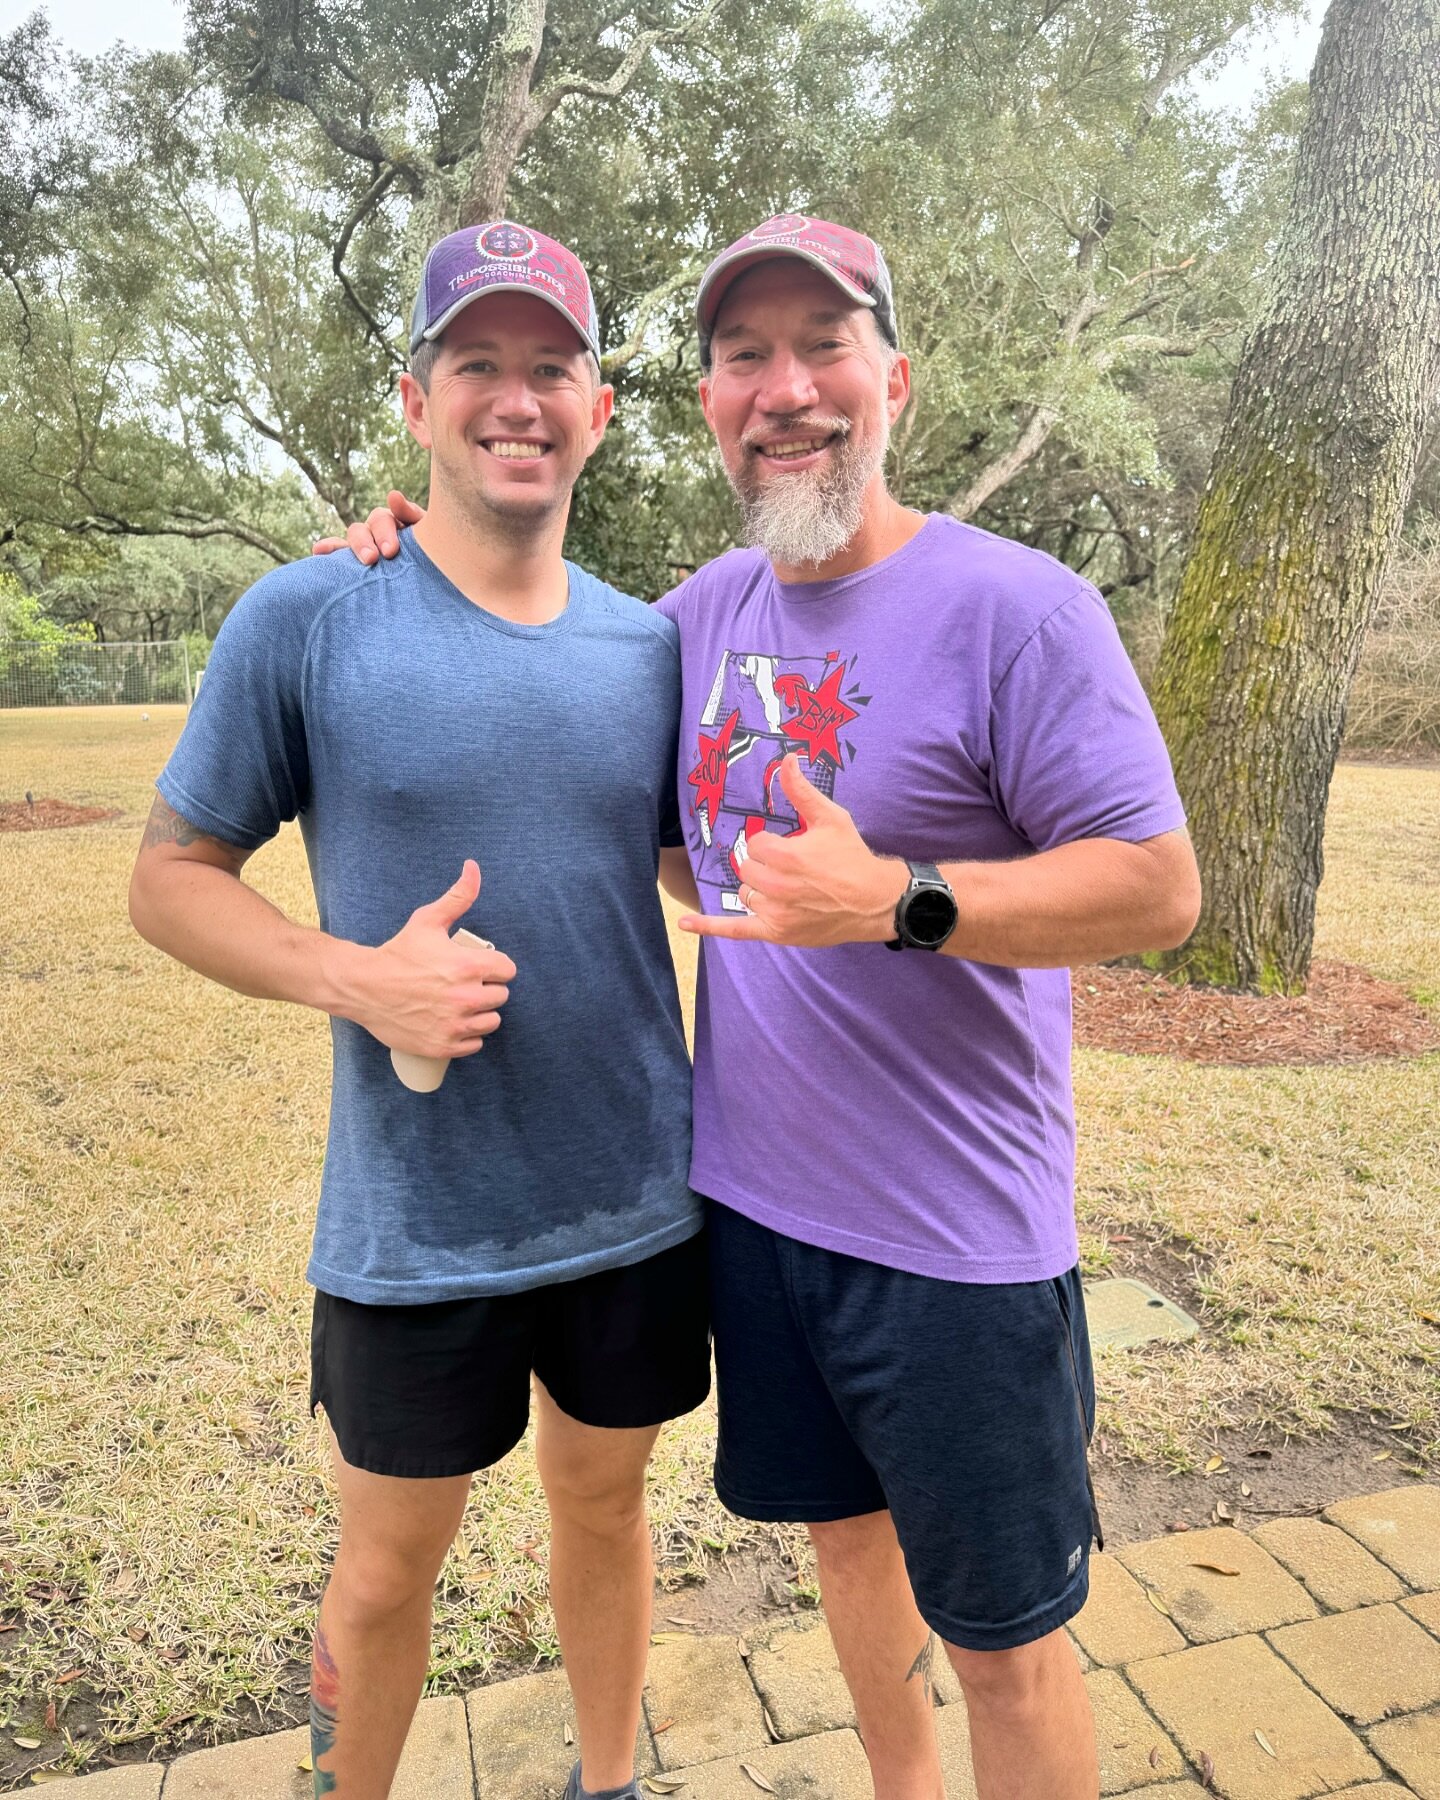 We&rsquo;re excited to welcome Larry @larry_gosselin89 to #teampurple 
Larry is a pilot with a complicated schedule and big goals! @ironmantri Gulf Coast &amp; Florida 

Give him the love #fam 

#triposse #tpc #finishstrong #tricoaching  #purplepower